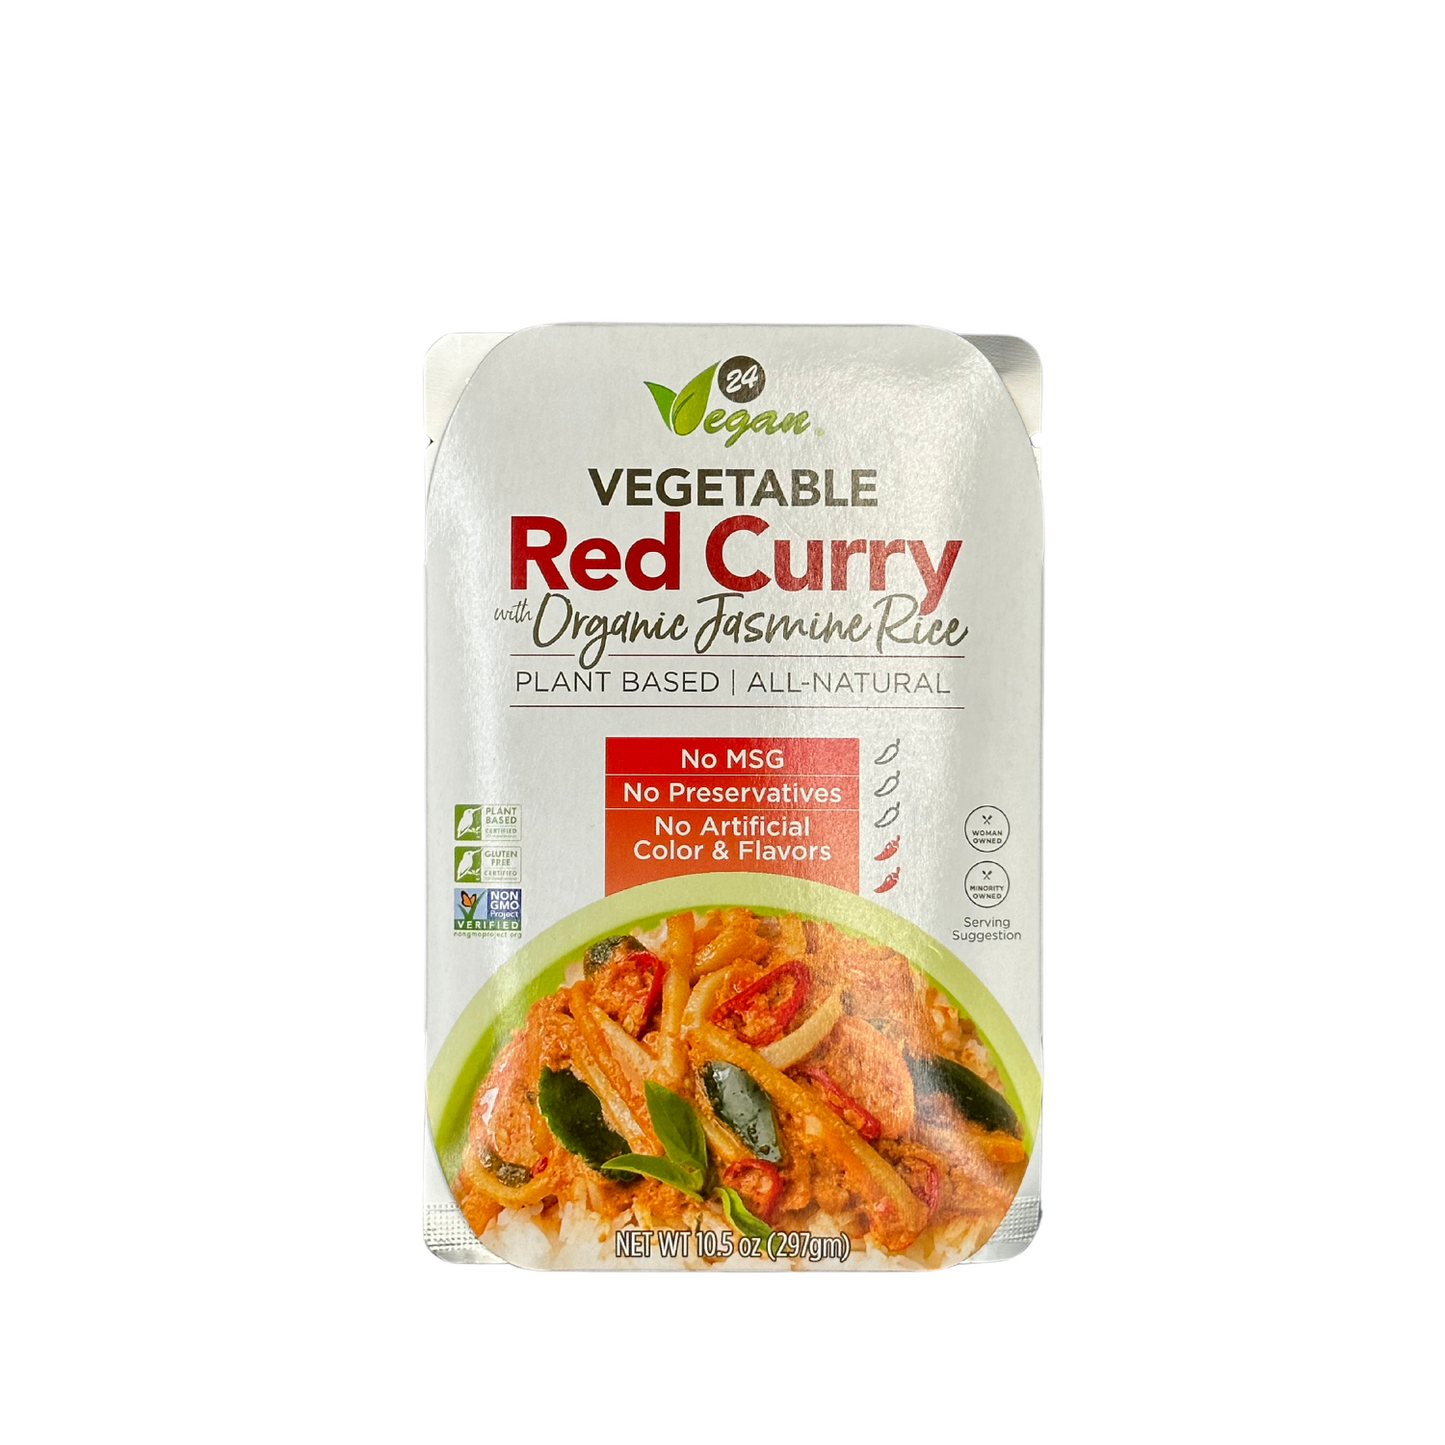 24Vegan Instant Meal Vegetable Red Curry with Organic Rice